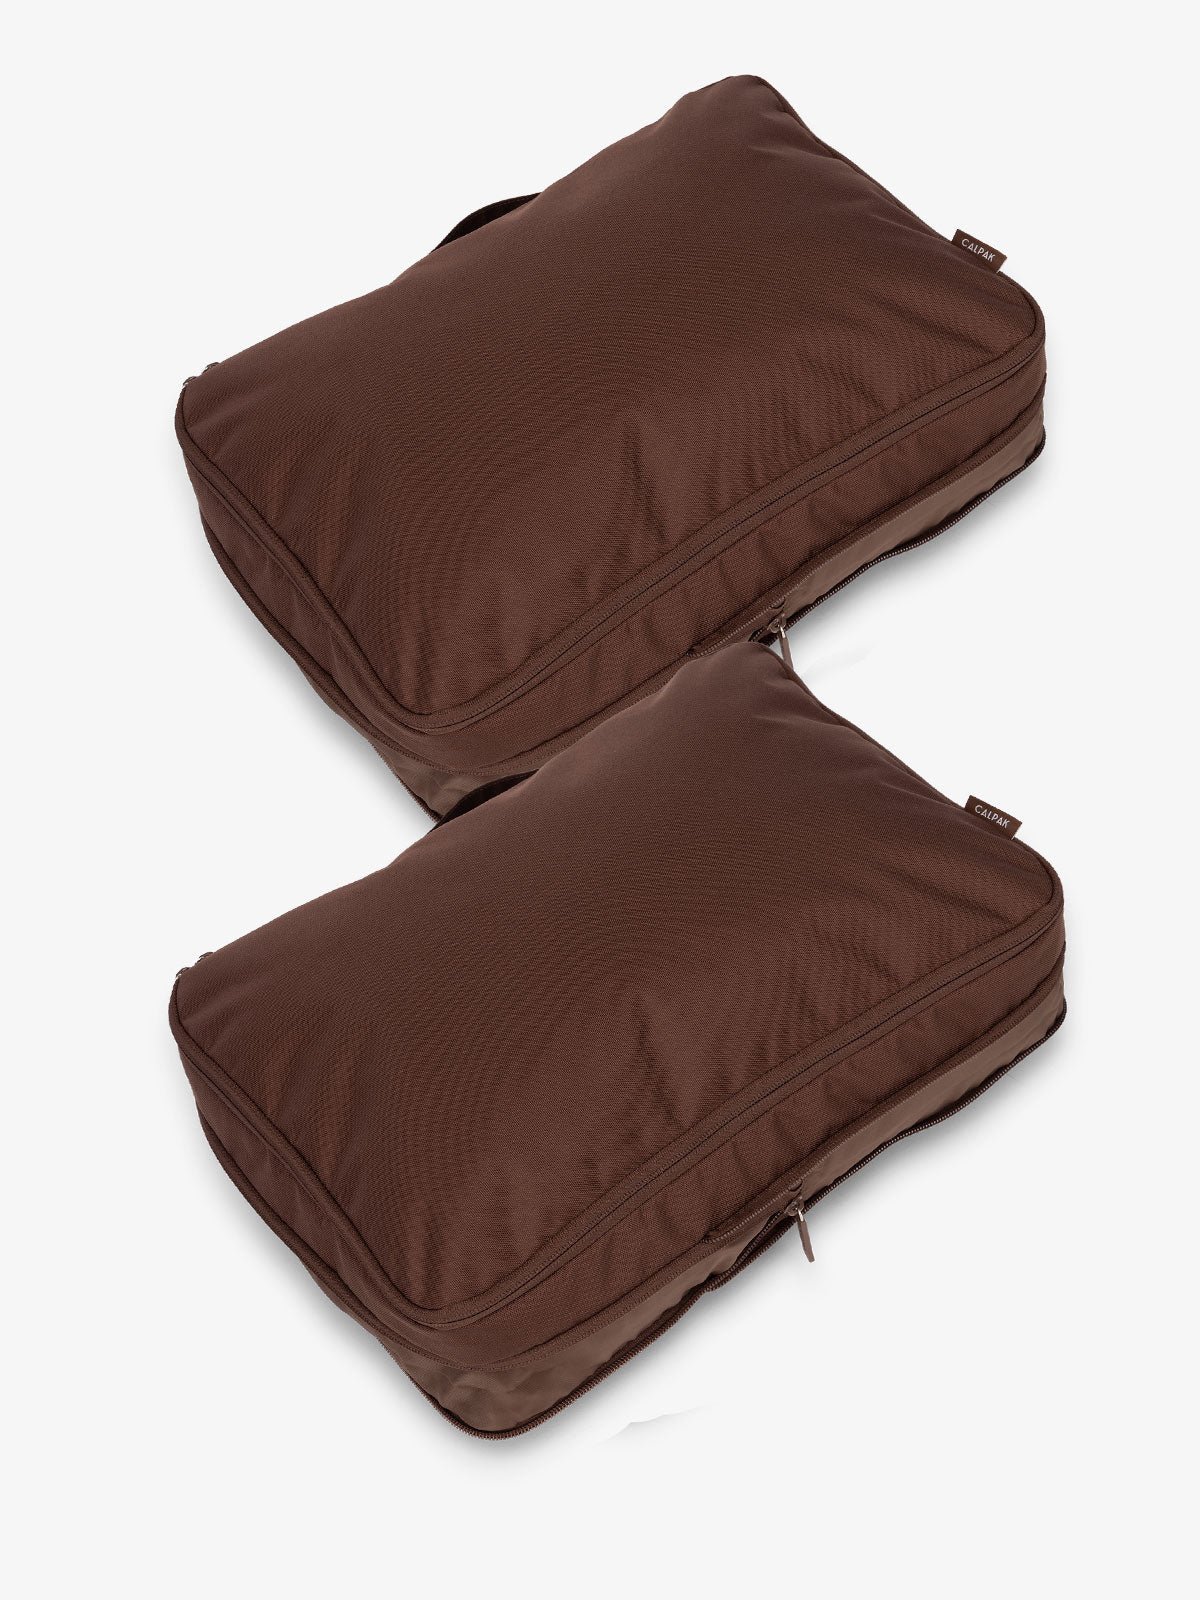 CALPAK large packing cubes with top handles and expandable by 4.5 inches in dark brown walnut